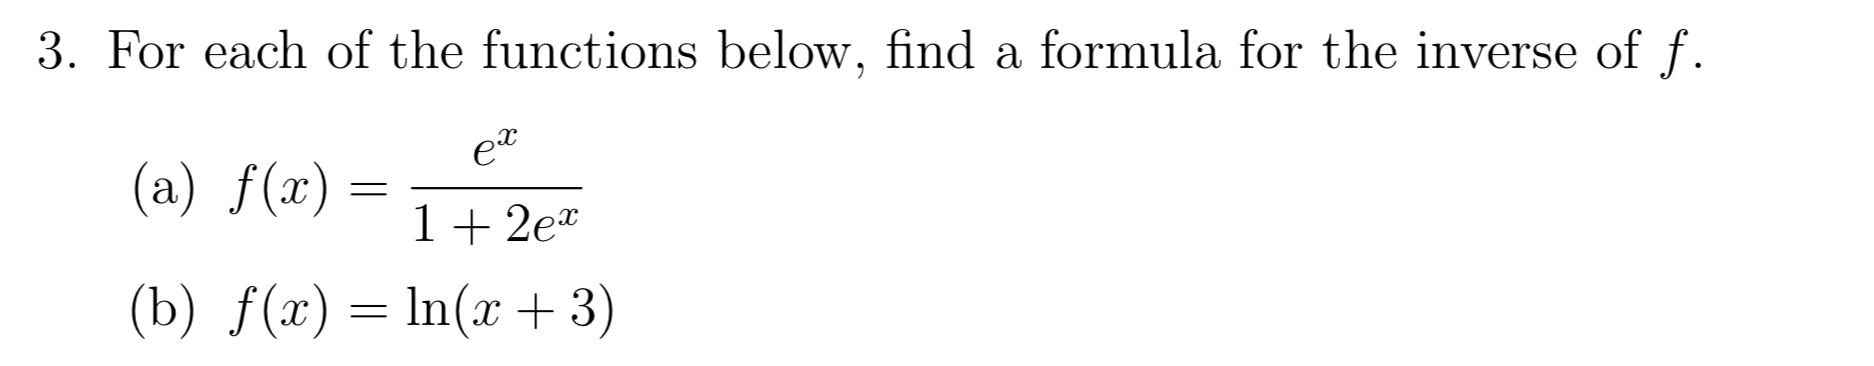 3. For each of the functions below, find a formula for the inverse of f.
ea
(a) f(x)
1 2e*
(b) f(x)In(x 3)
